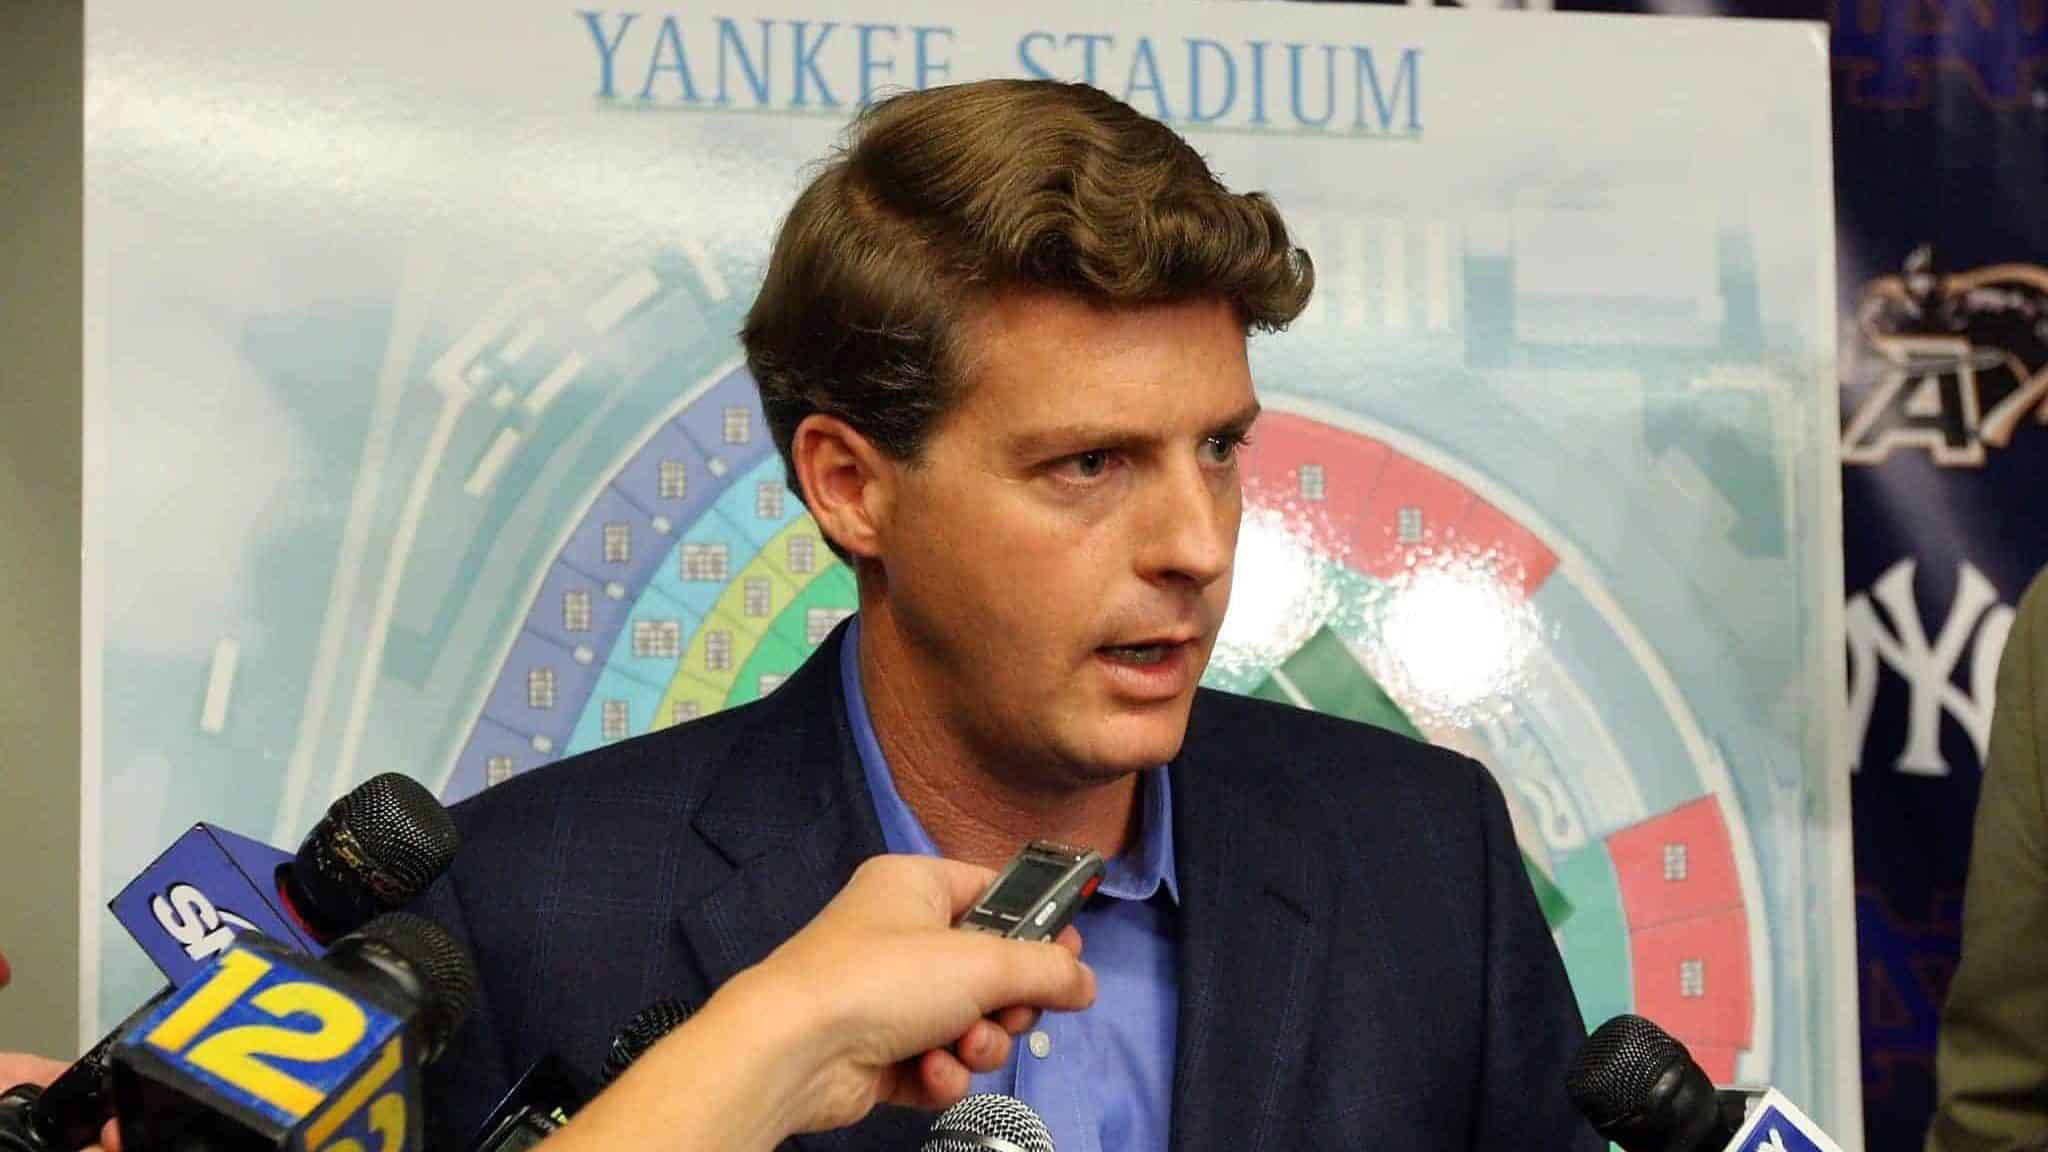 NEW YORK - JULY 20: New York Yankees Managing General Partner Hal Steinbrenner speaks during a press conference announcing that Yankee Stadium will play host to the 2010 Notre Dame v Army college football game on July 19, 2009 at Yankee Stadium in the Bronx borough of New York City. The game is to be played on November 20, 2010.